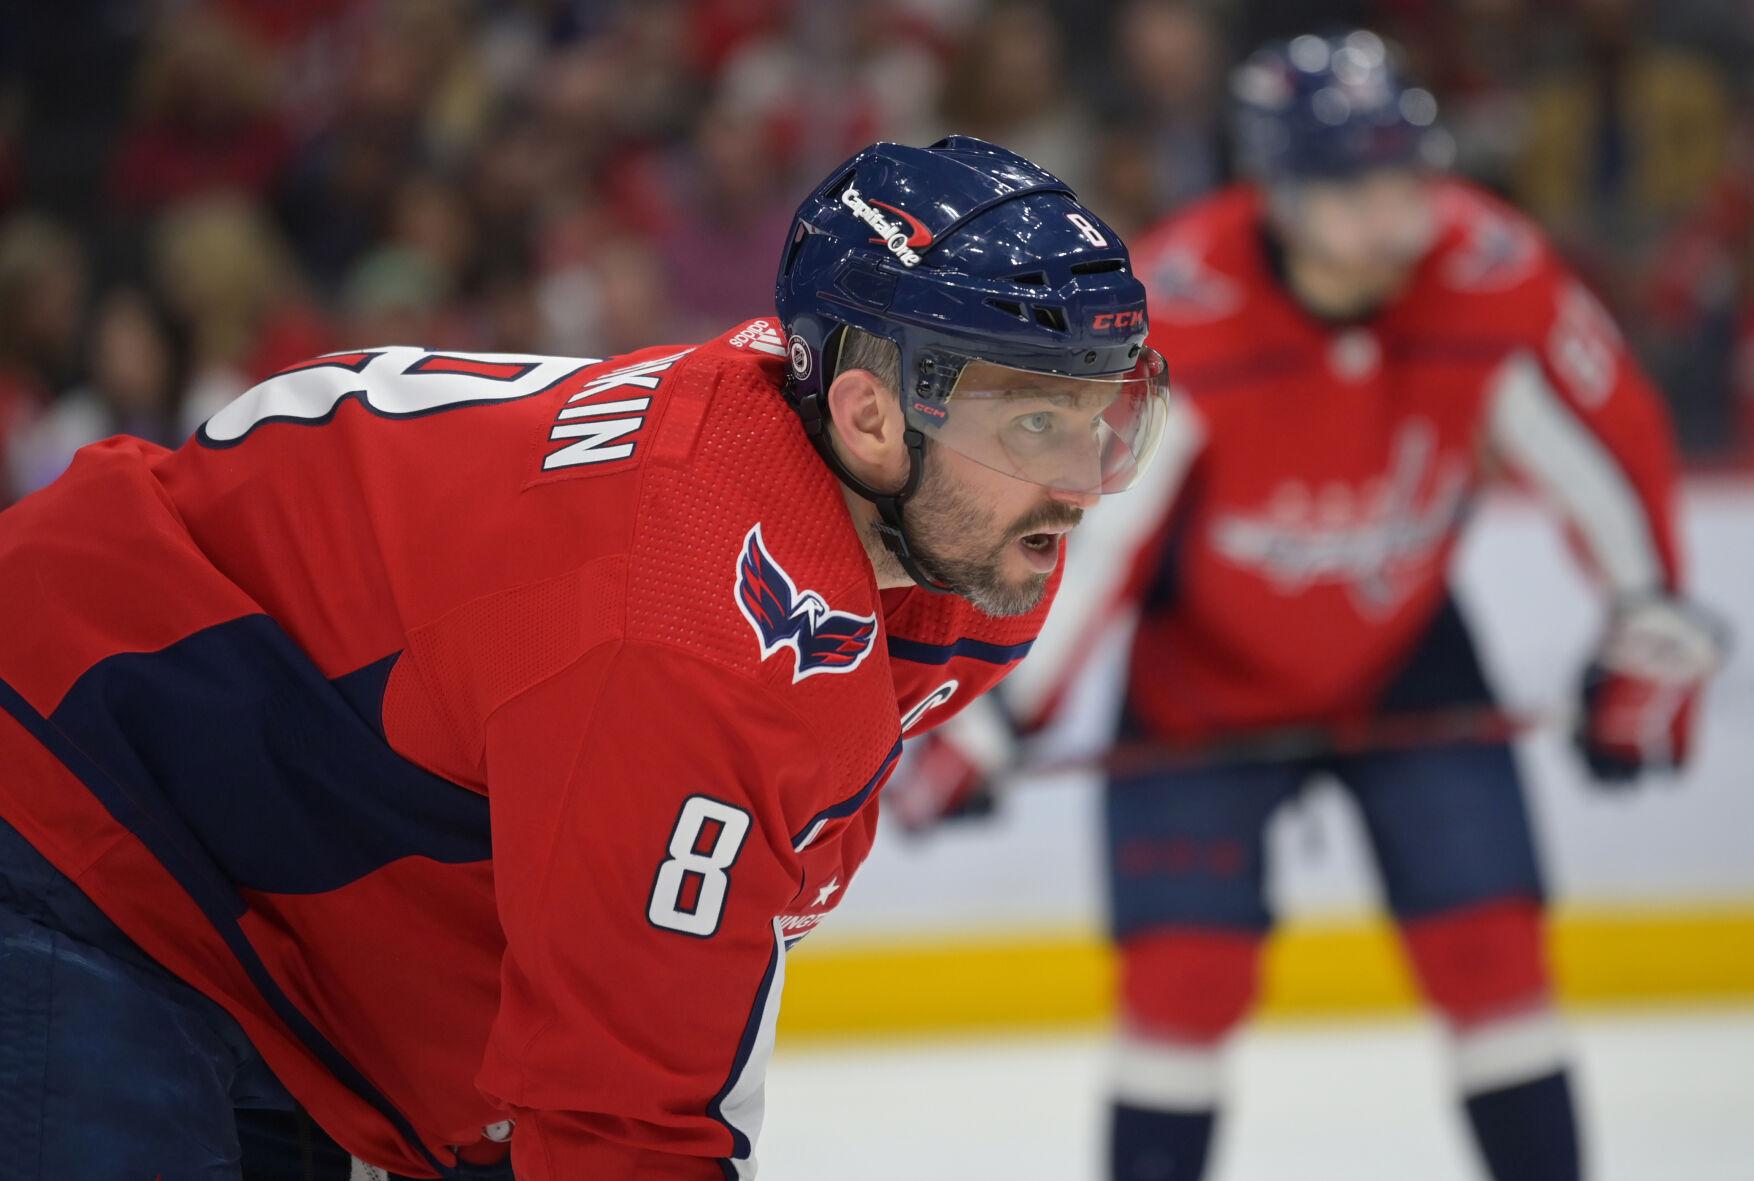 Ovechkin injured as Capitals lose to Maple Leafs in shootout